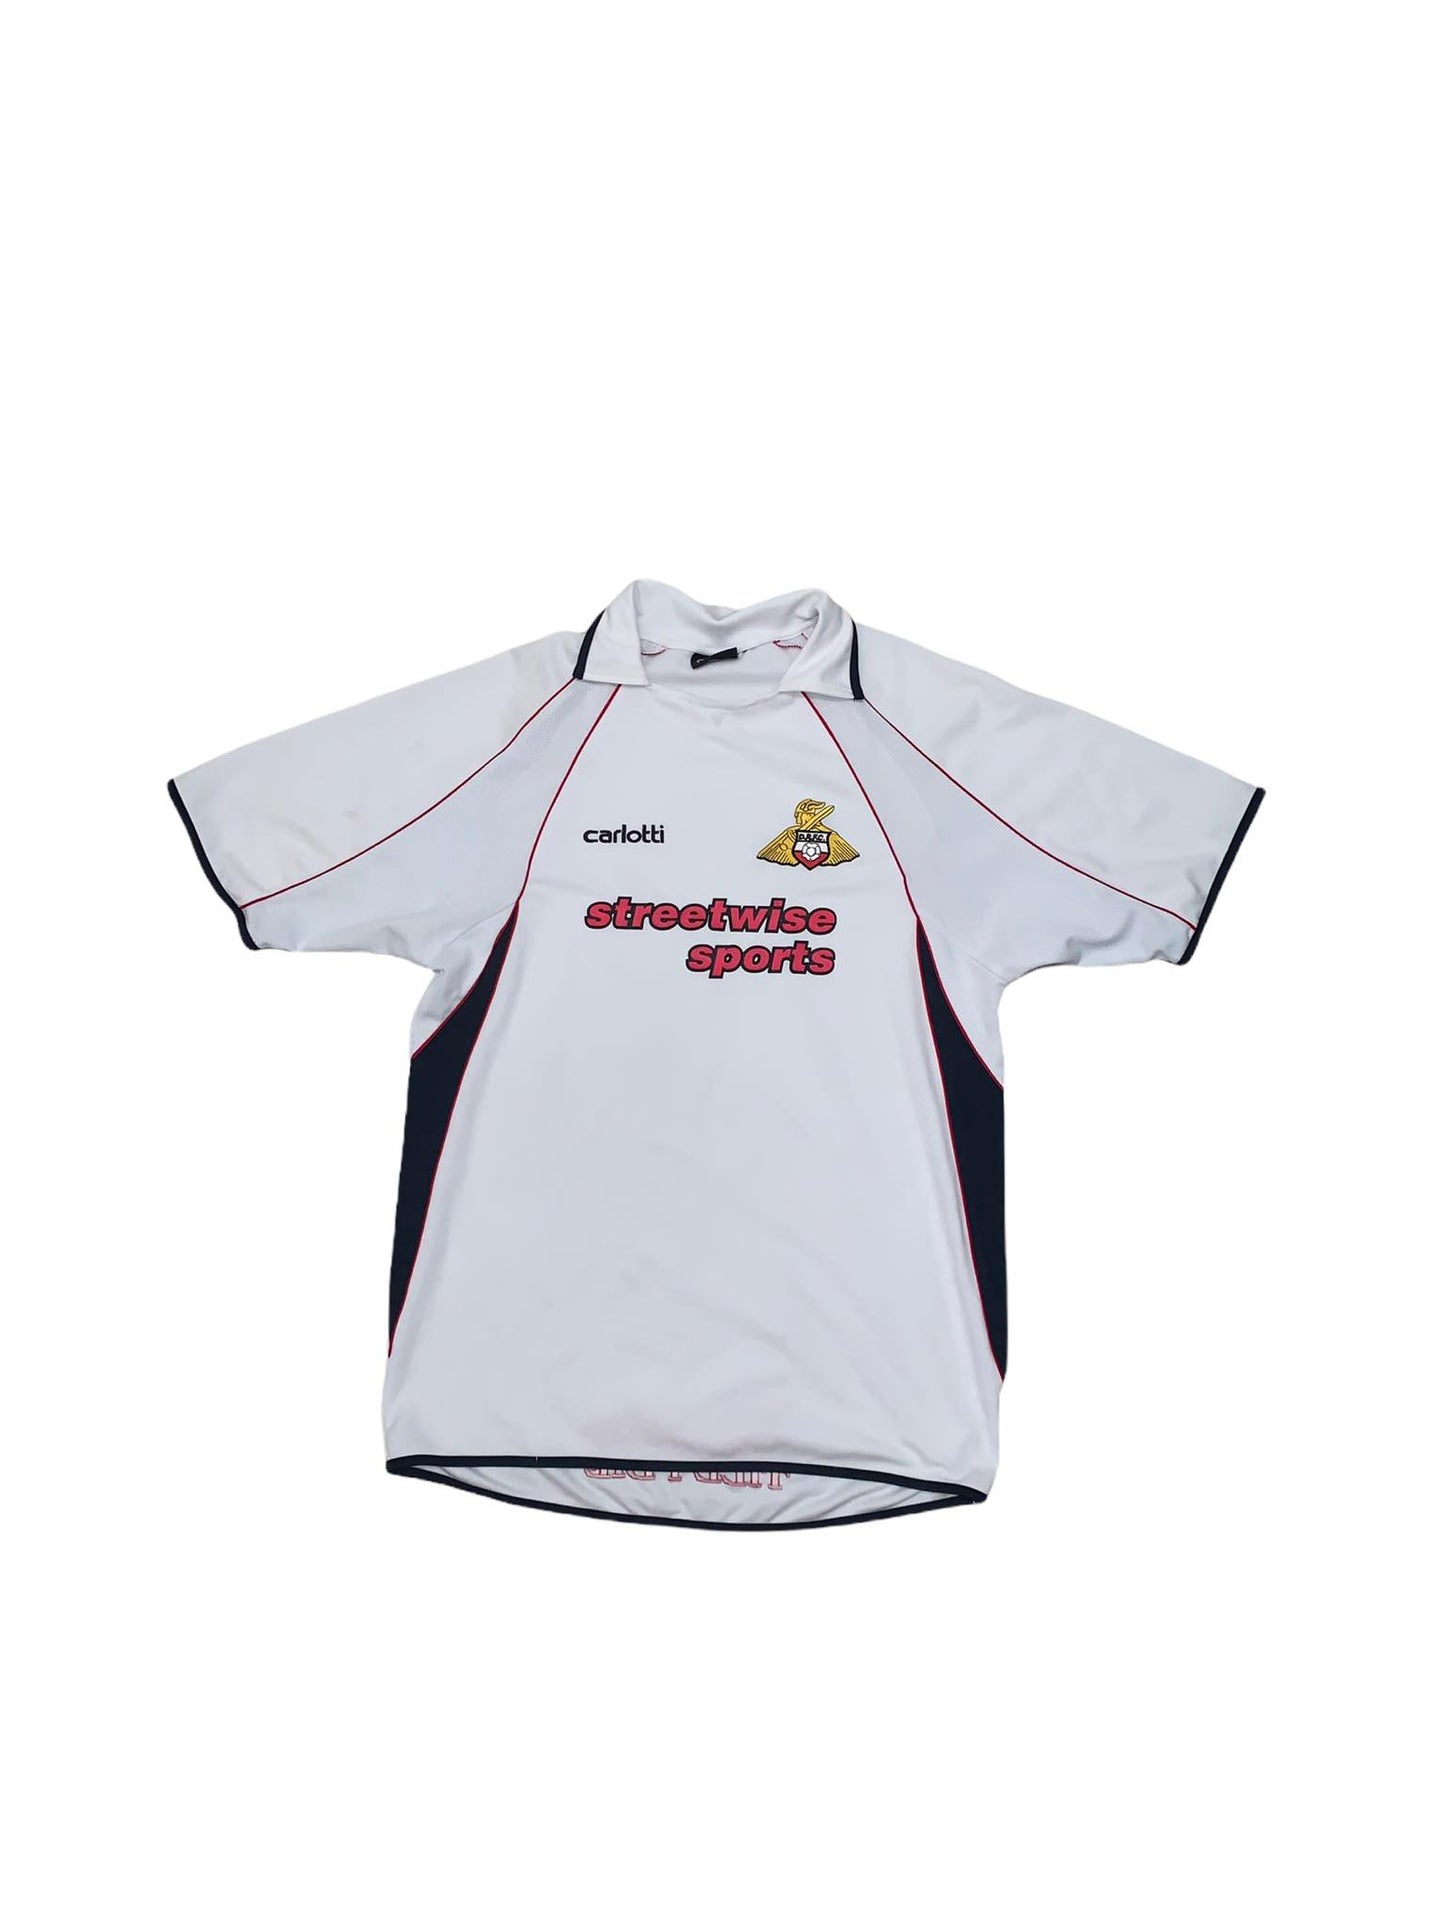 Doncaster Rovers 2004/05 Away Shirt (XL) - KITLAUNCH